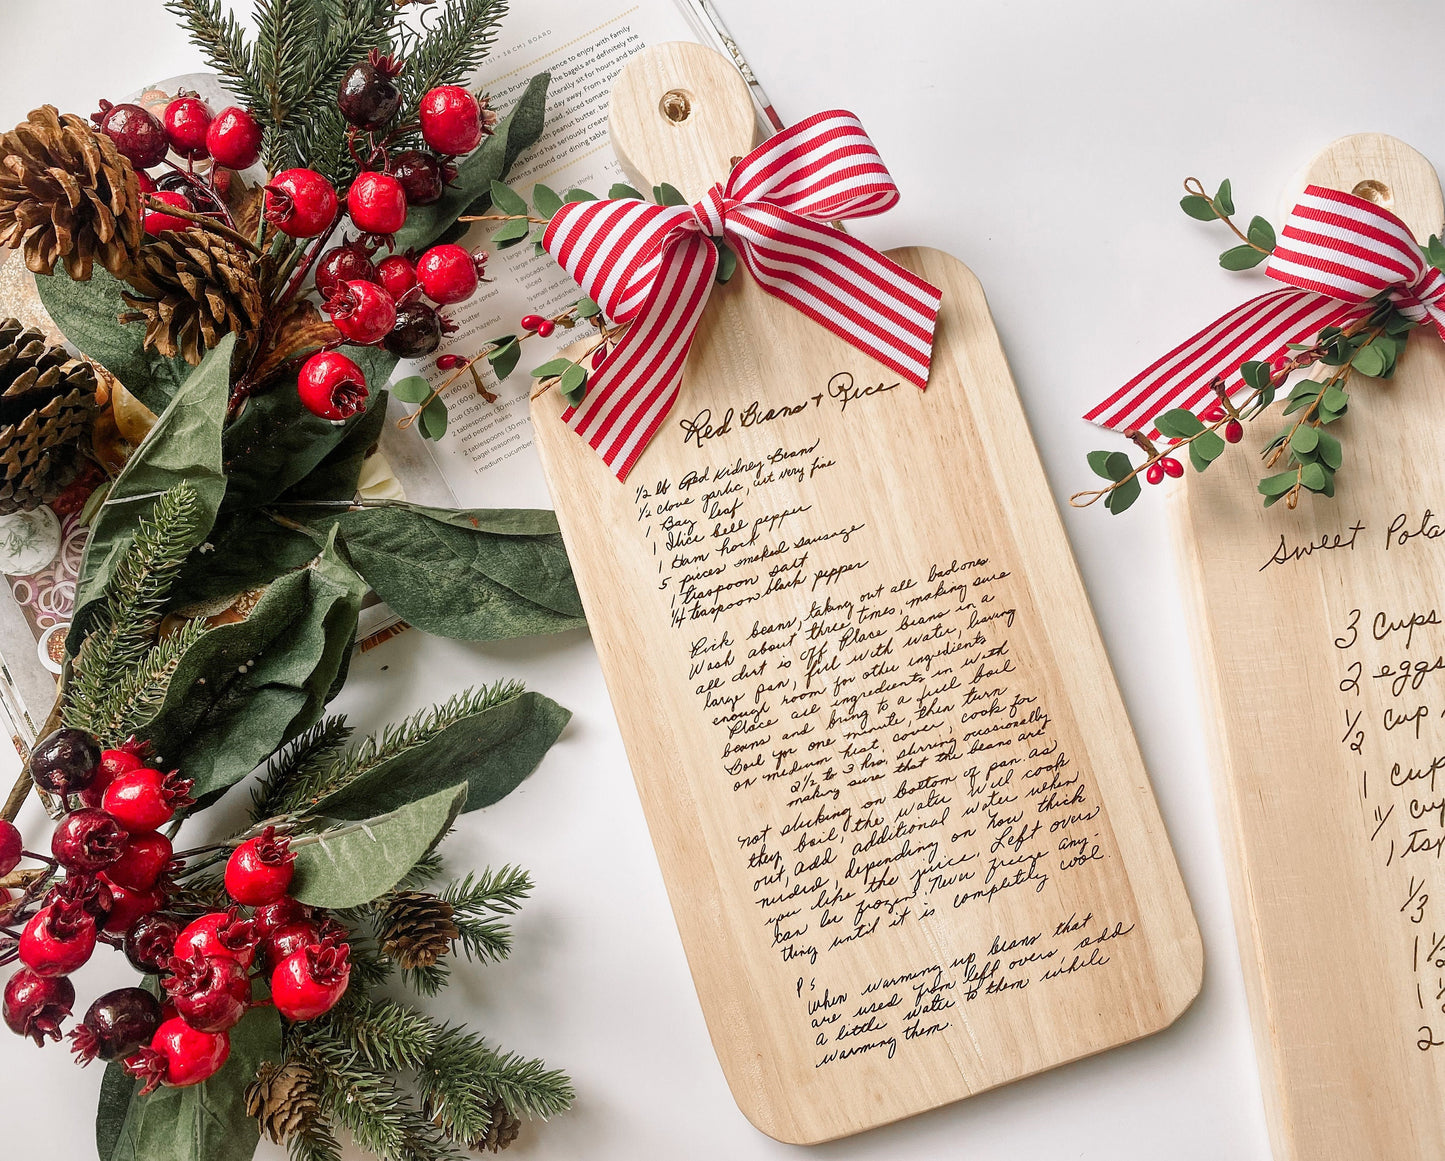 Make a gift from the heart – Recipe Cutting Board Décor  Join us December  10th to learn how to use the Automatic Background Remover tool in Design  Space and Cricut iron-on